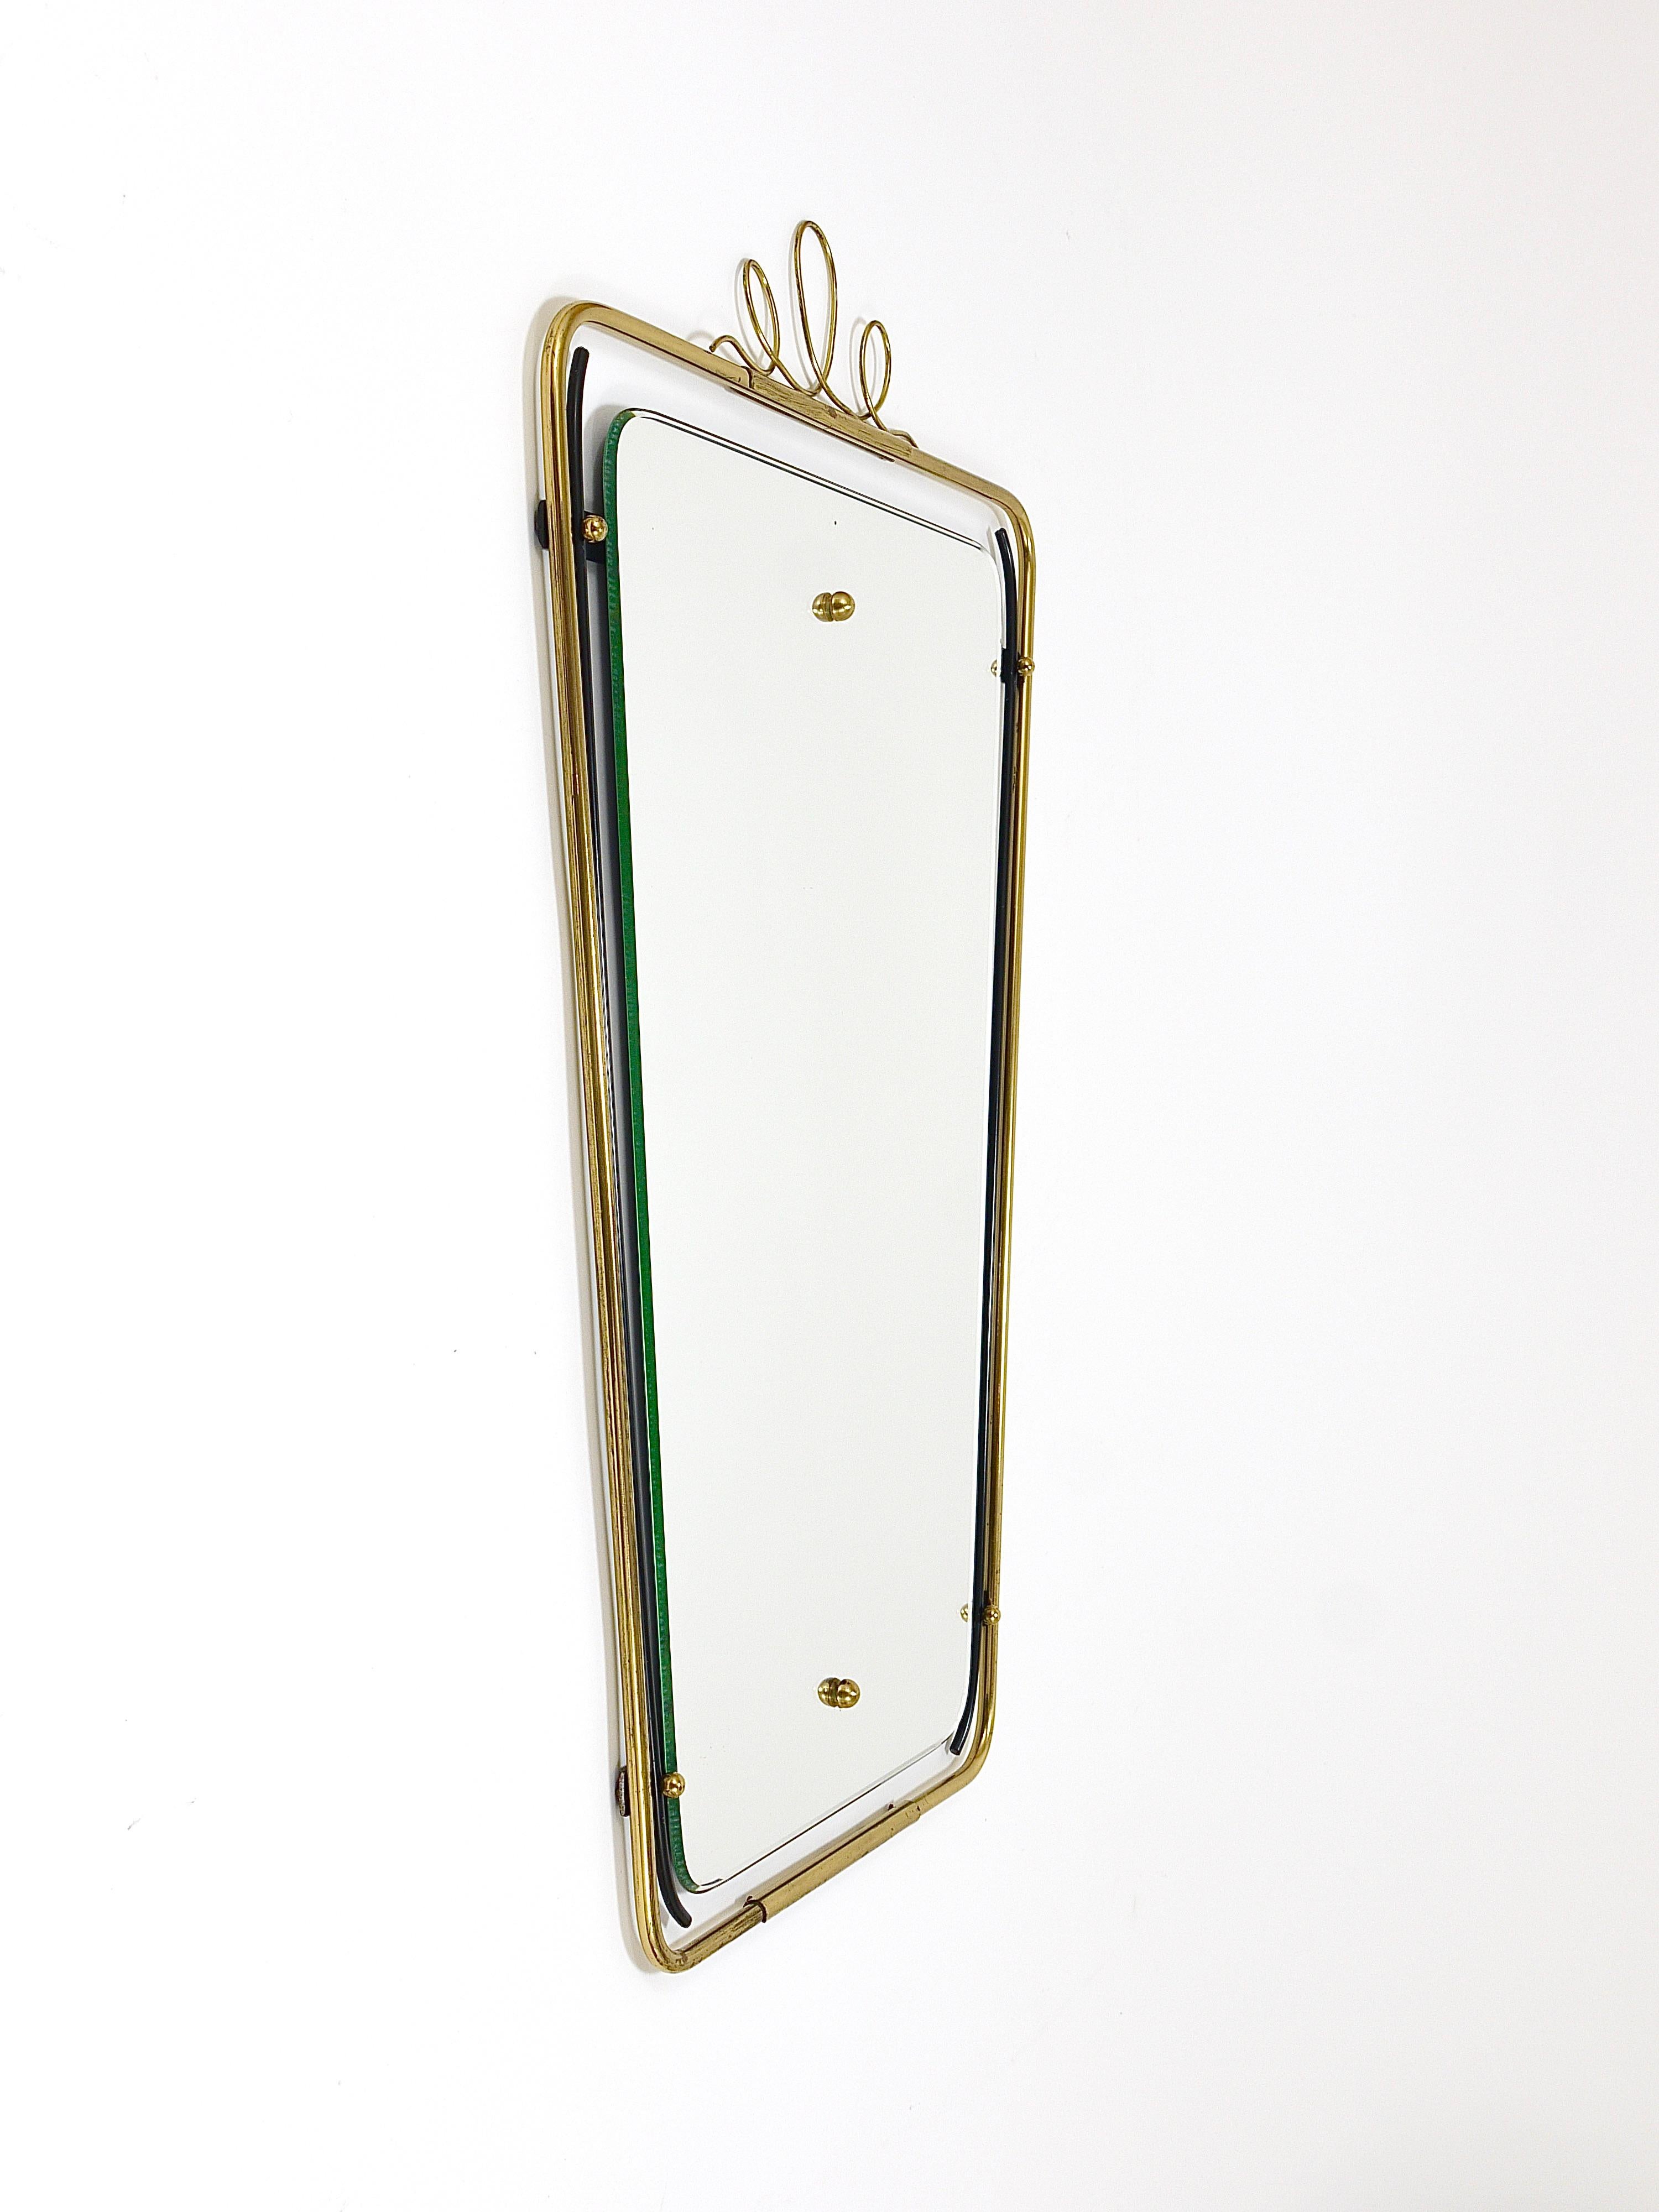 Midcentury Modern Brass Loops Wire Wall mirror, Italy, 1950s For Sale 7